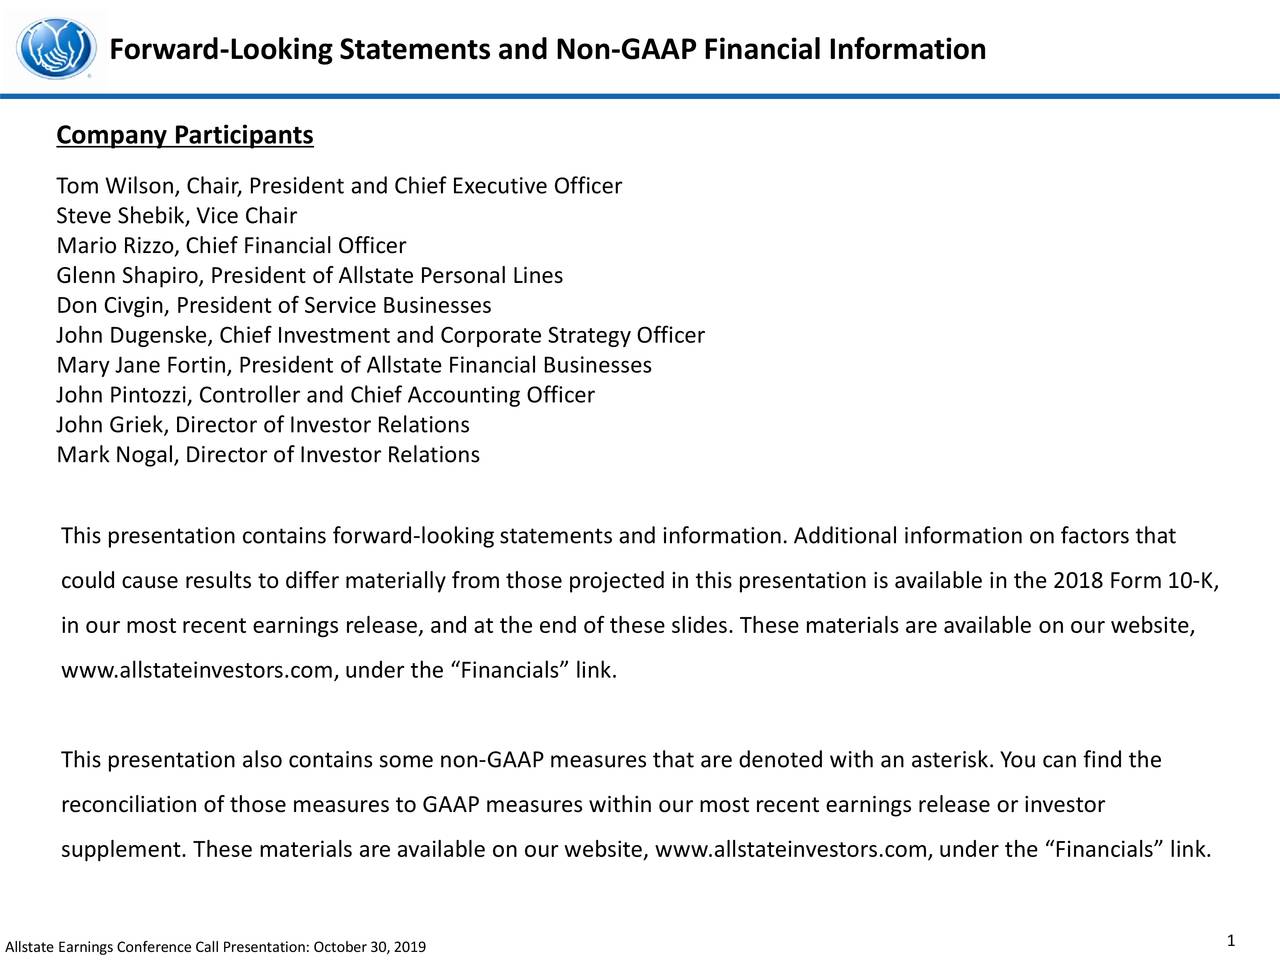 Forward-Looking Statements and Non-GAAP Financial Information